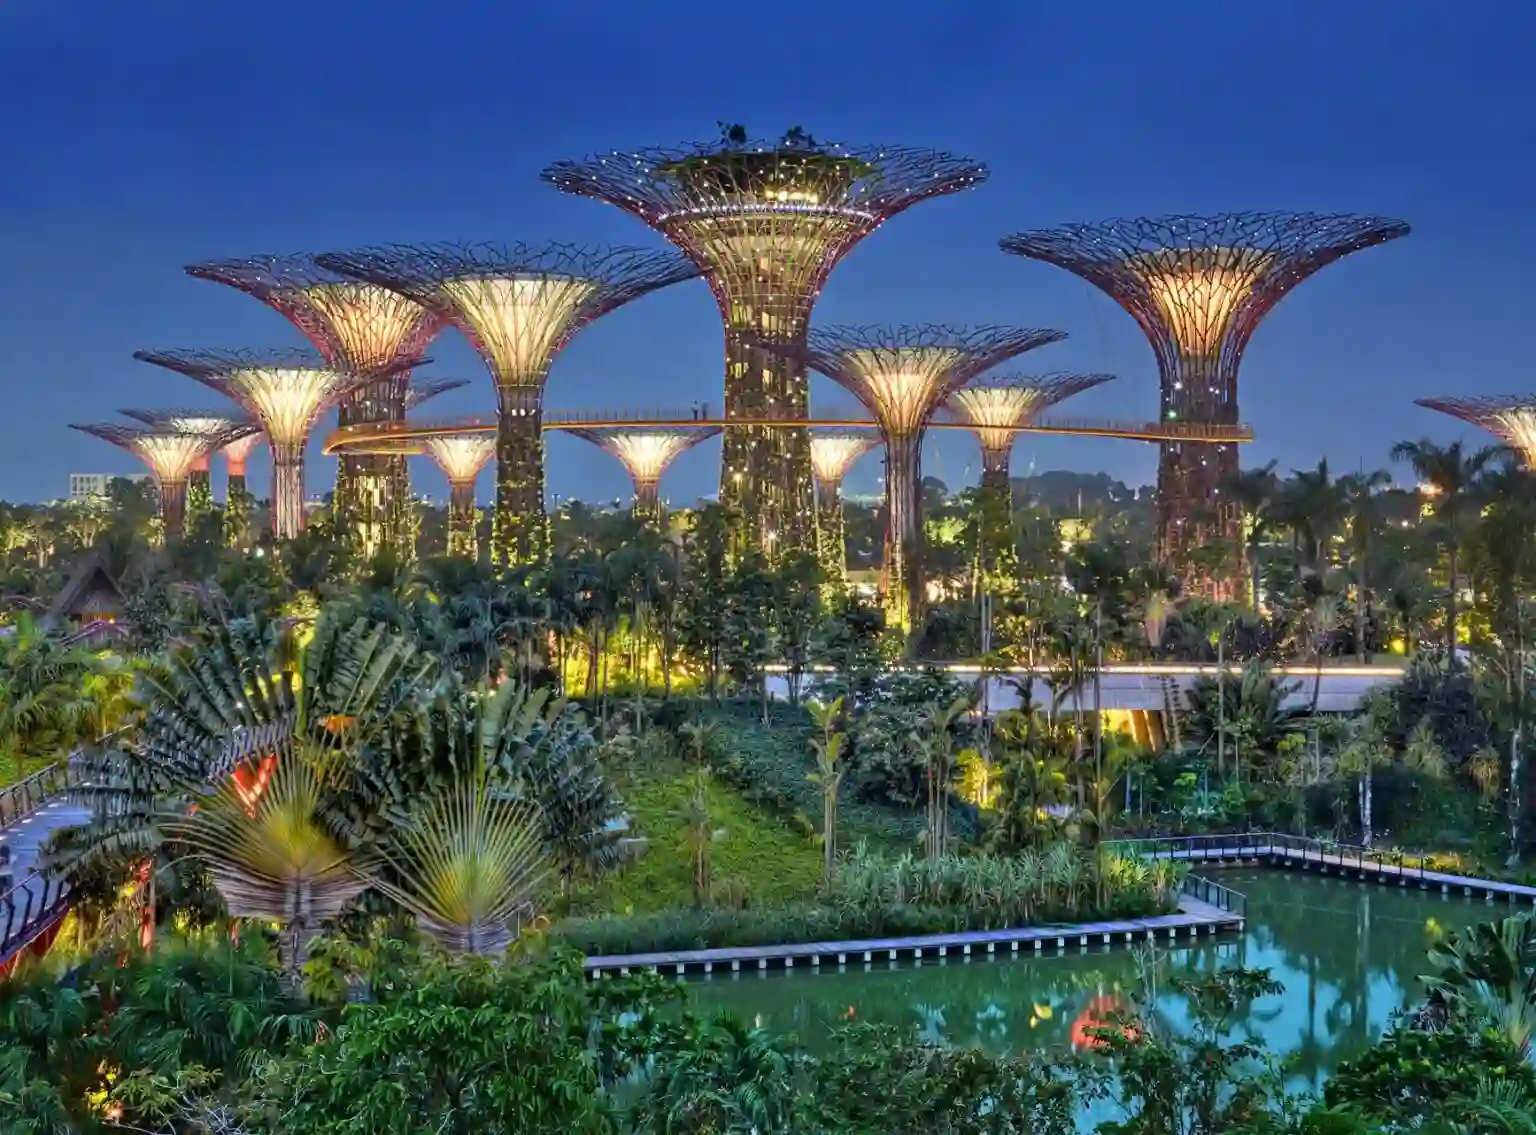 Exploring the Gardens by the Bay